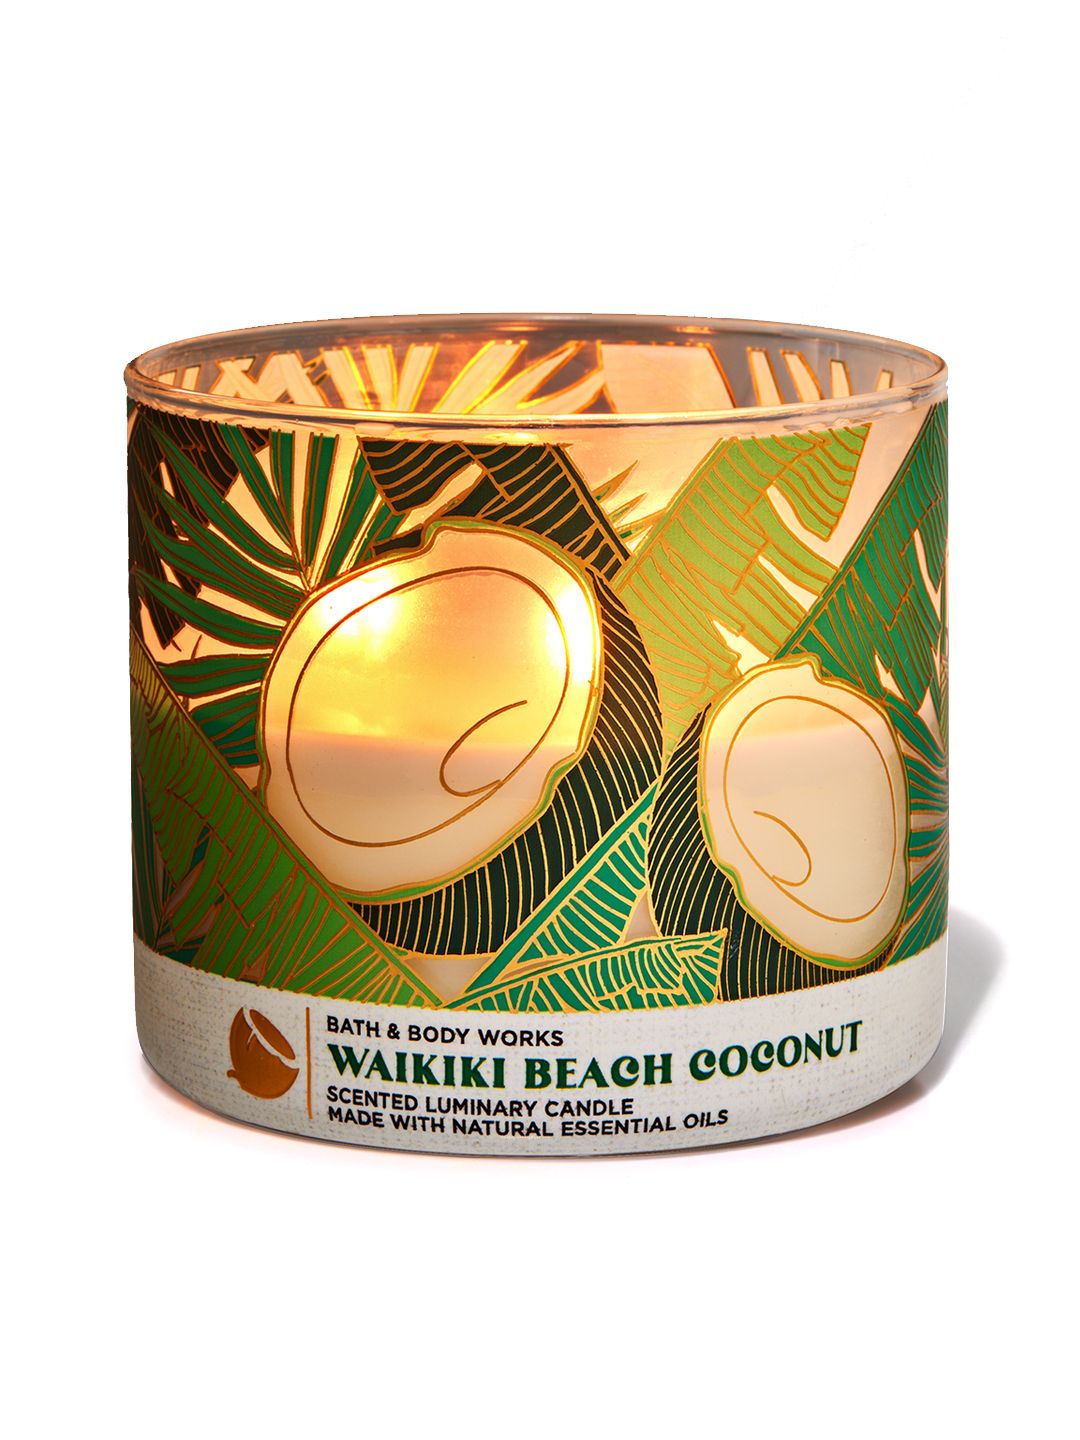 Bath & Body Works Waikiki Beach Coconut 3-Wick Scented Candle - 411 g Price in India